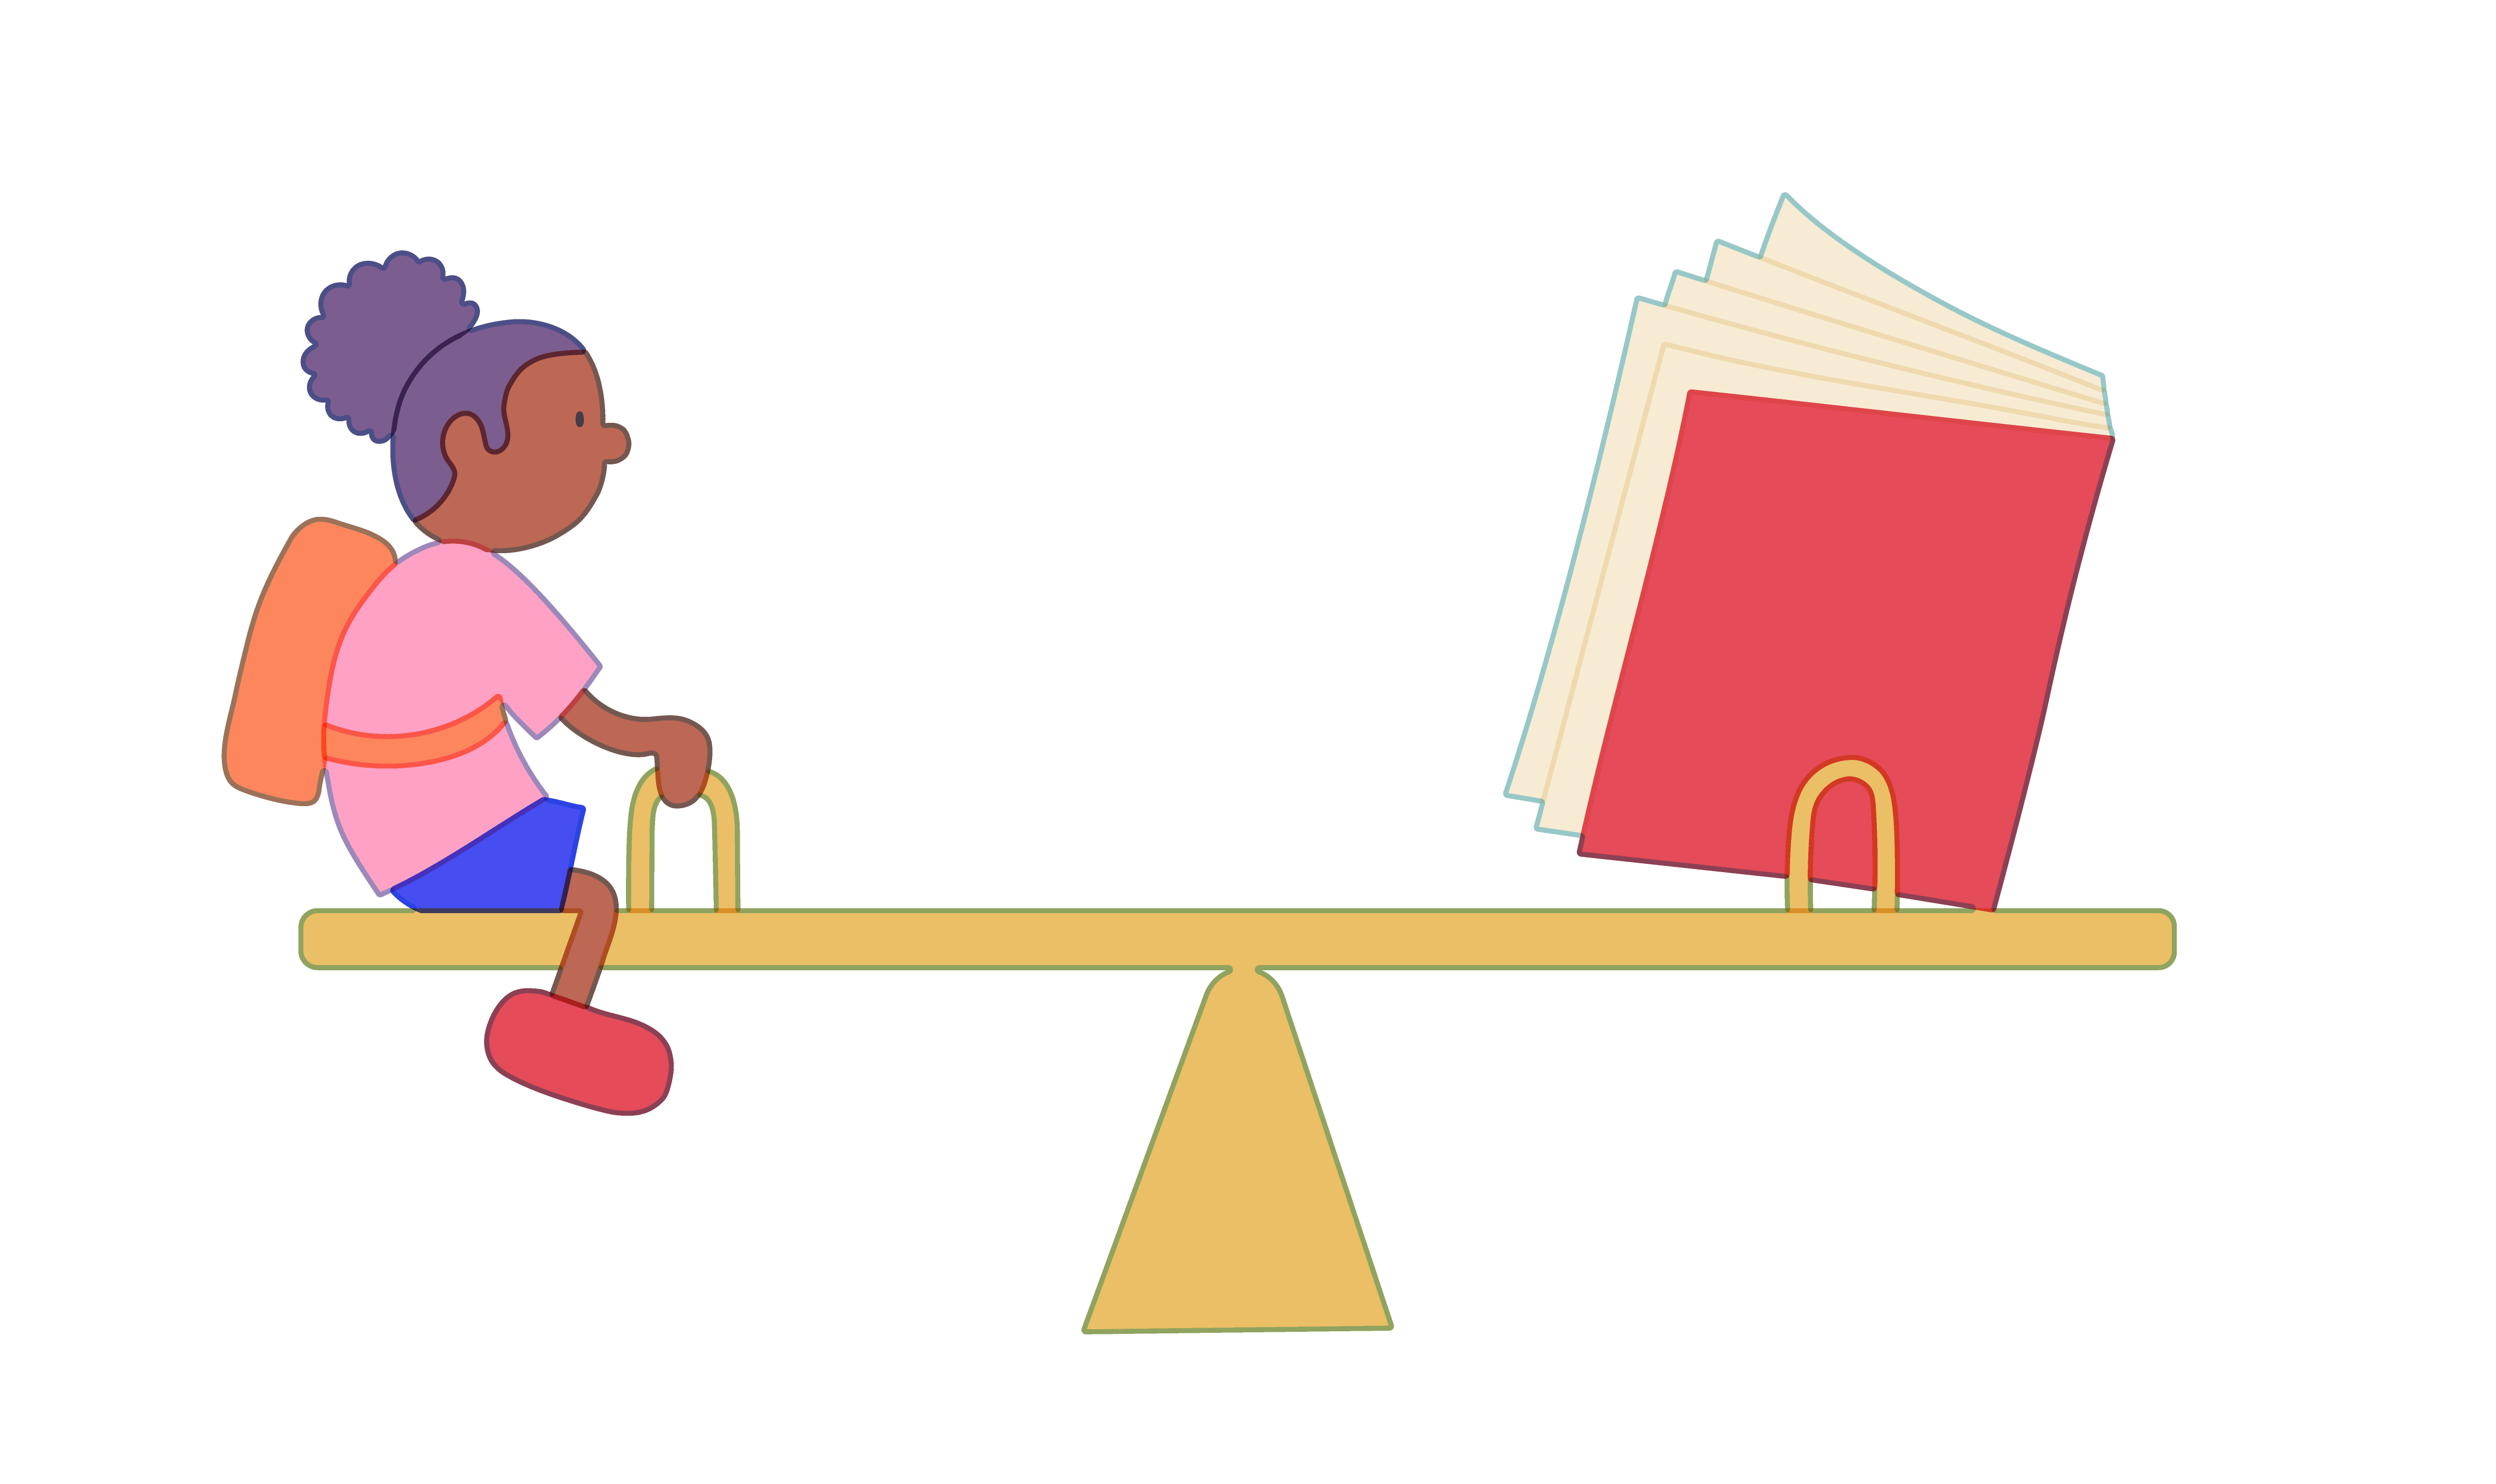 A young girl wearing a backpack sits on a seesaw with a book on the other end.